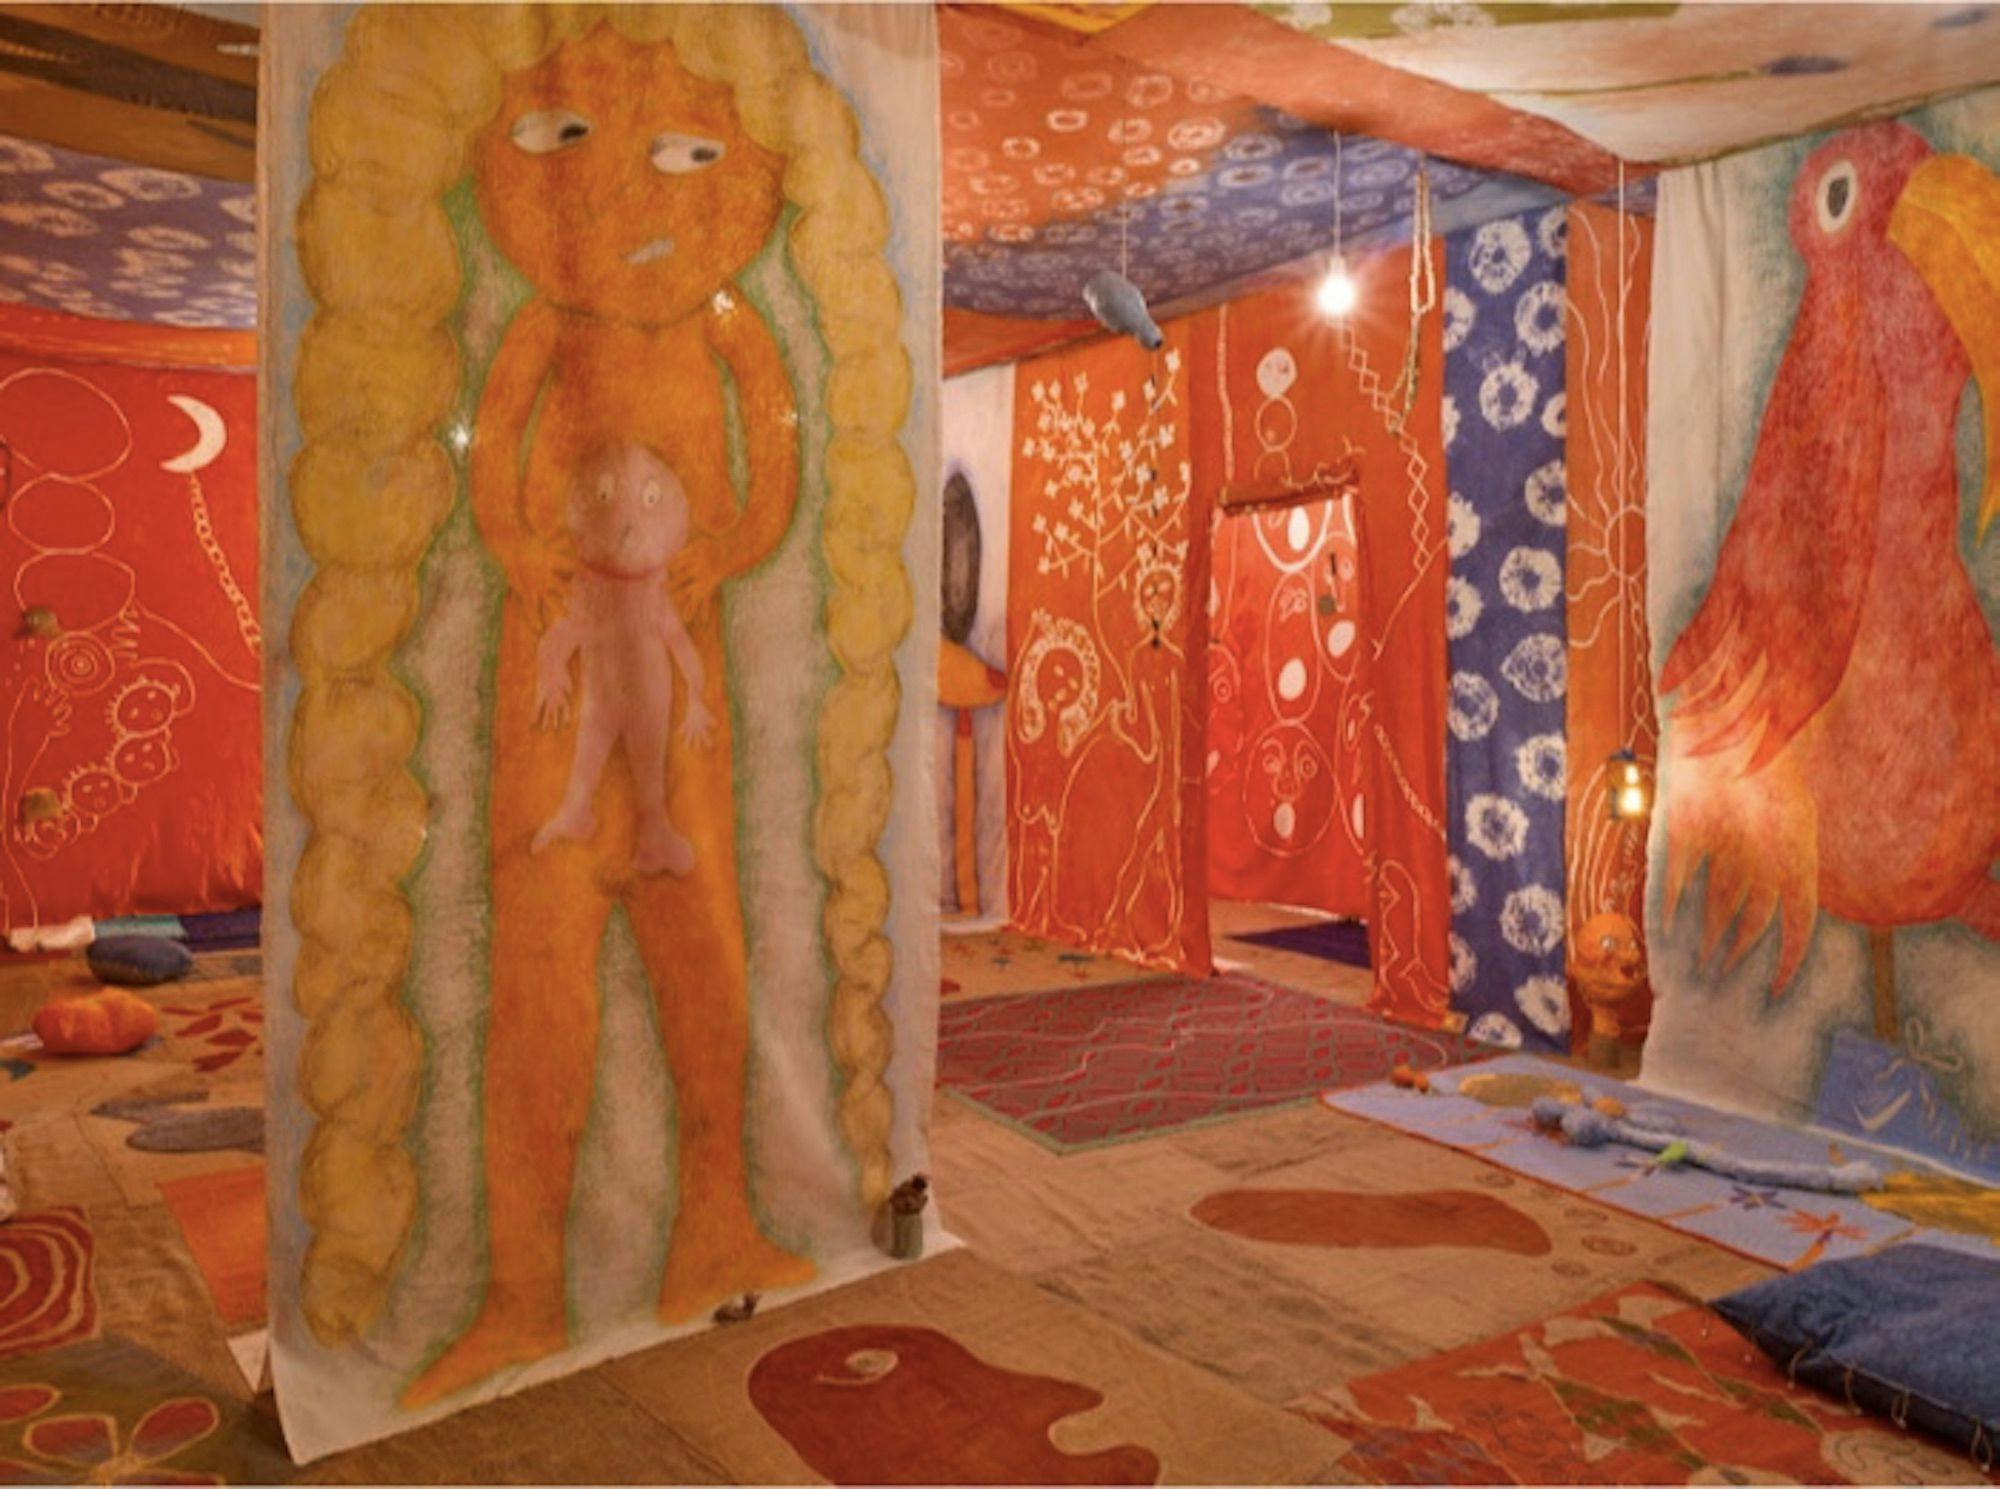 A room filled floor to ceiling with warm-toned carpets and tapestries.